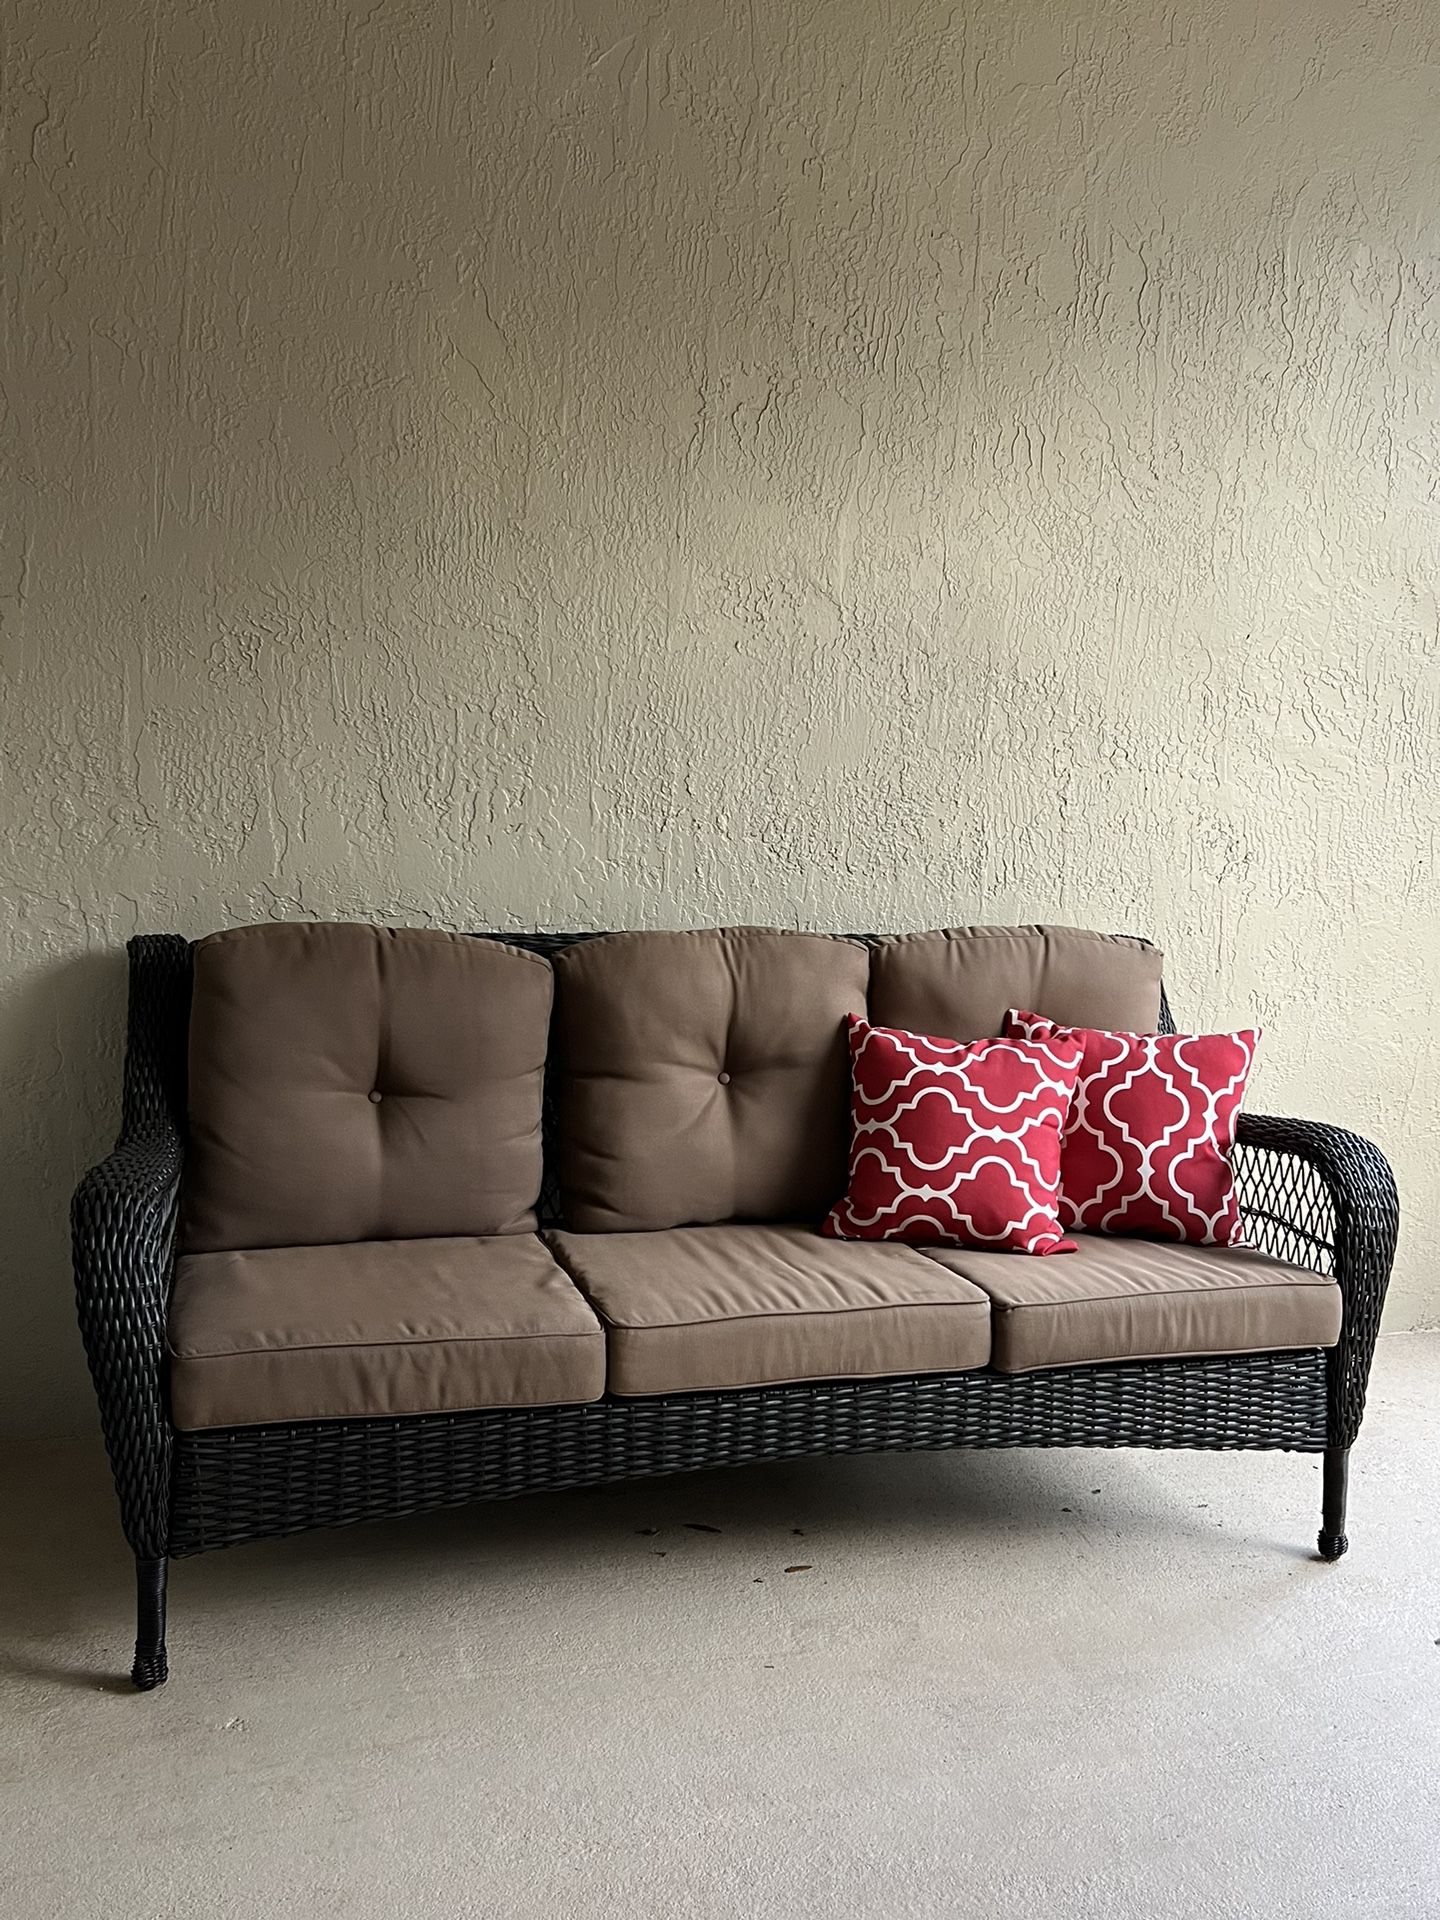 Outdoor Patio Couch Sofa (Wicker Brown)